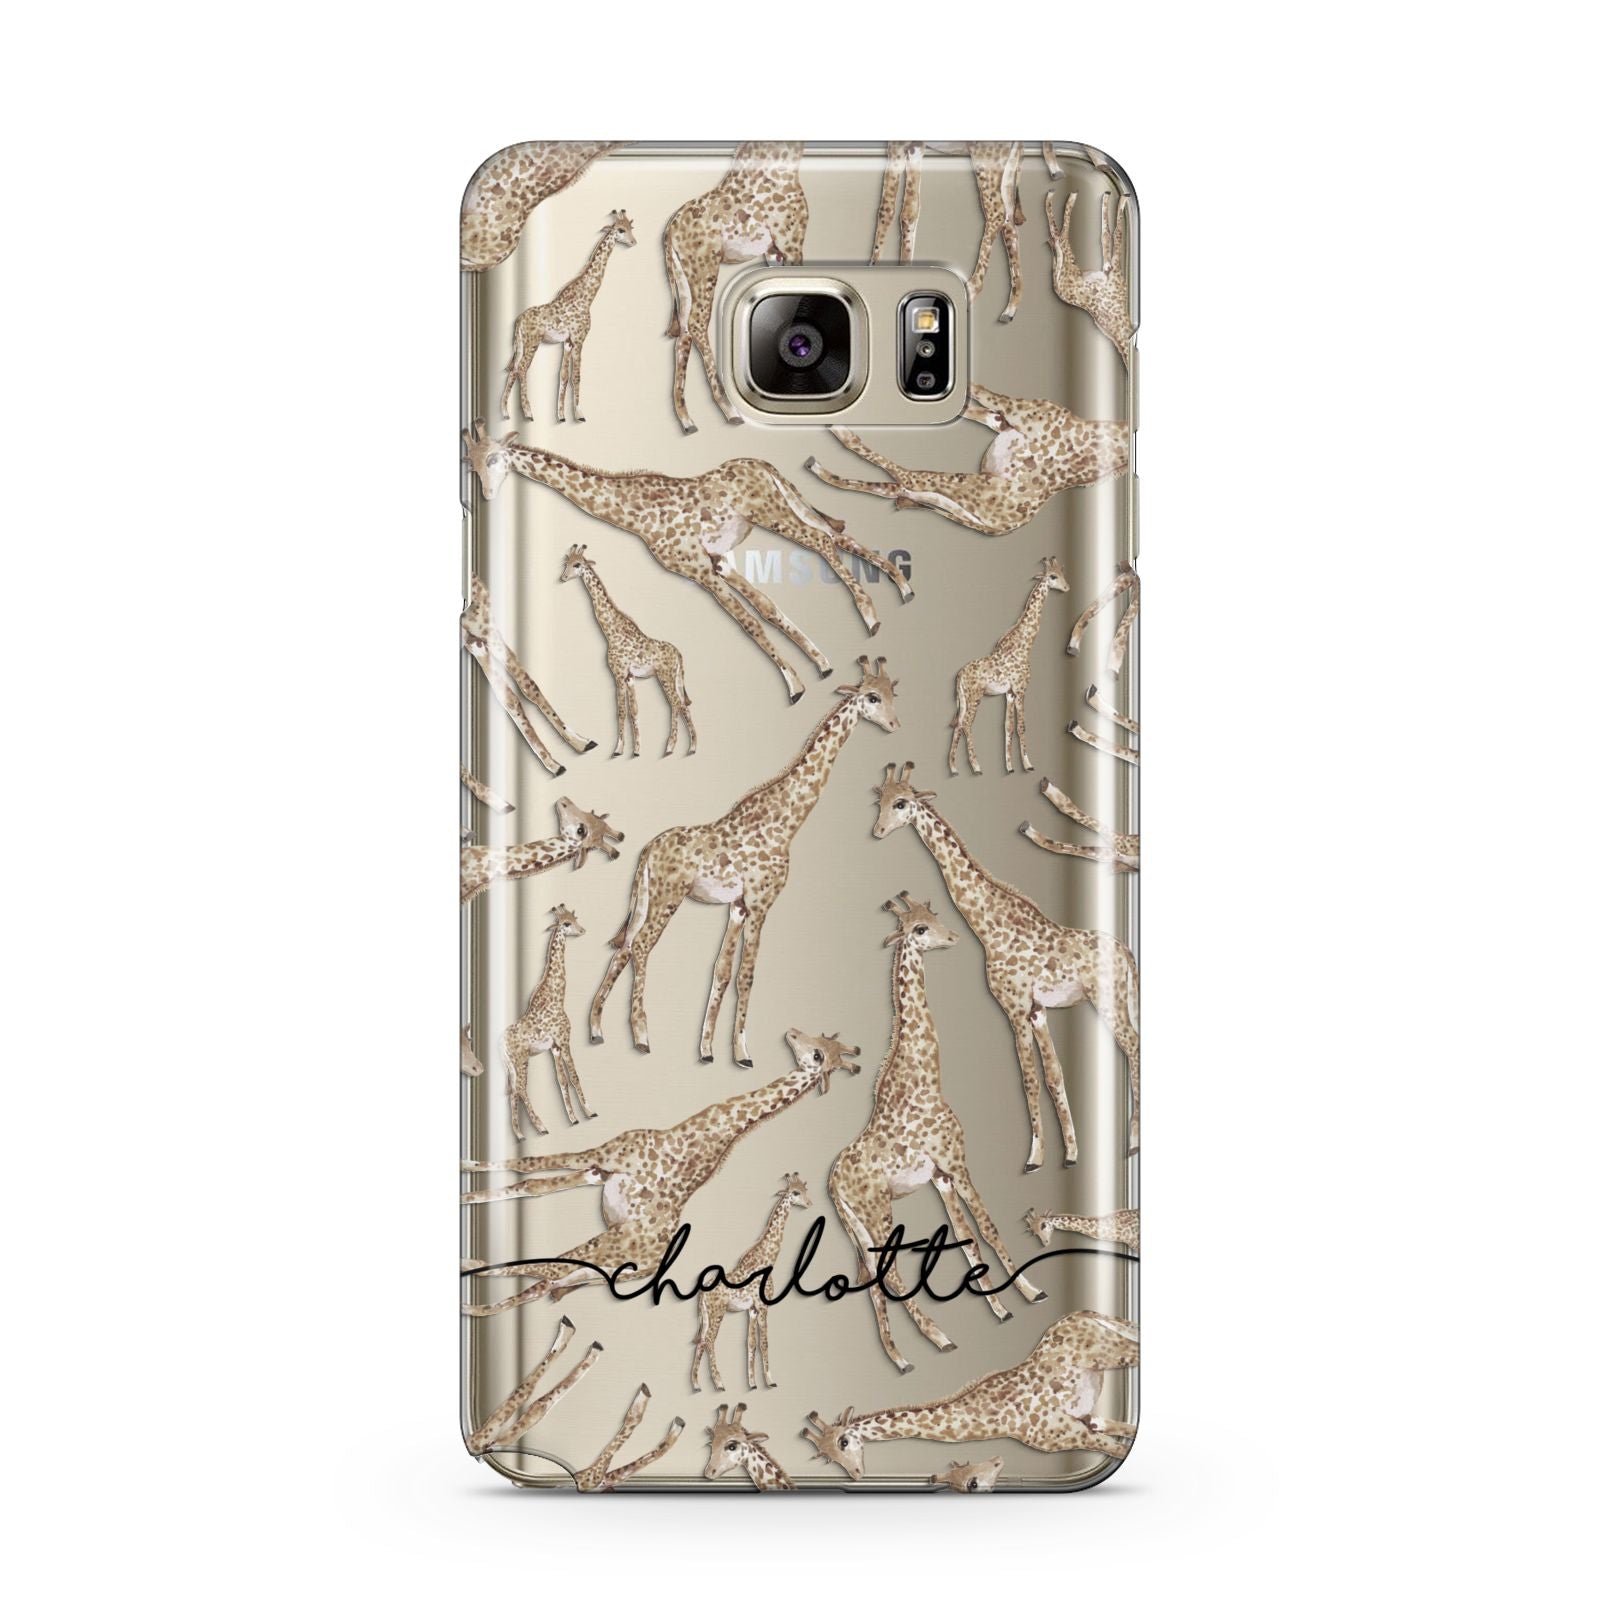 Personalised Giraffes with Name Samsung Galaxy Note 5 Case